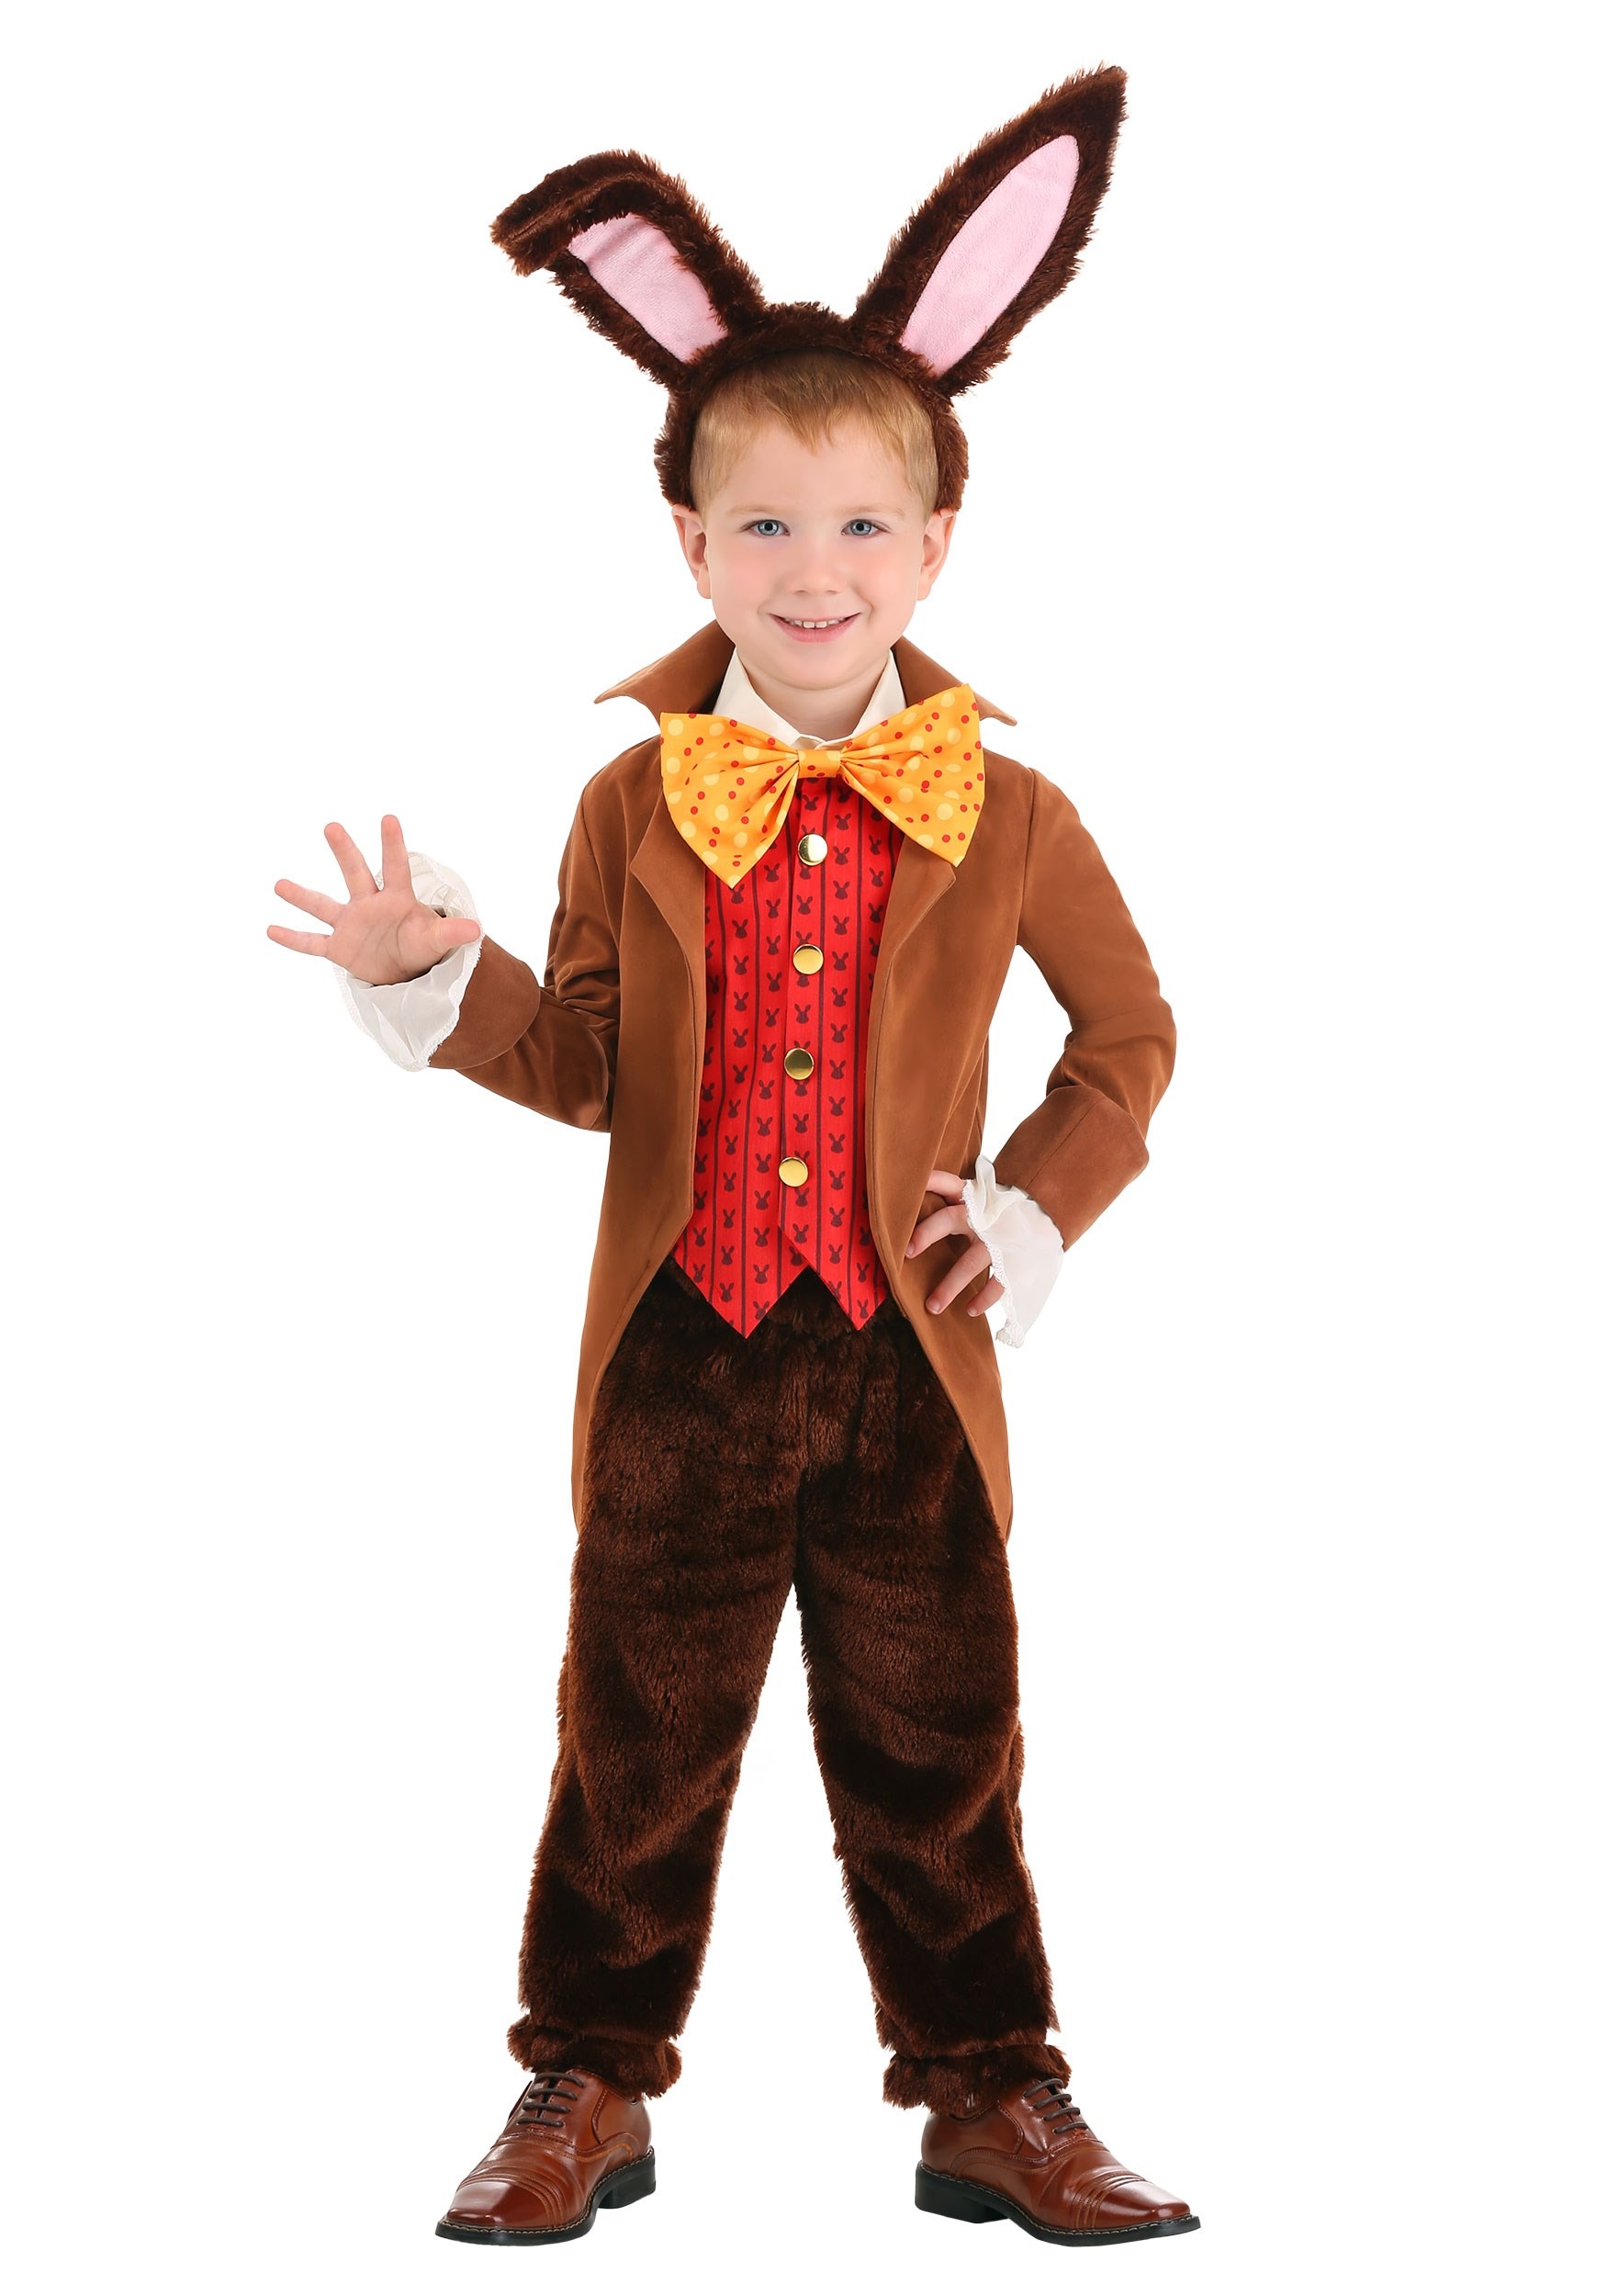 Photos - Fancy Dress March FUN Costumes Tea Time  Hare Costume for Toddlers Brown/Orange/ 